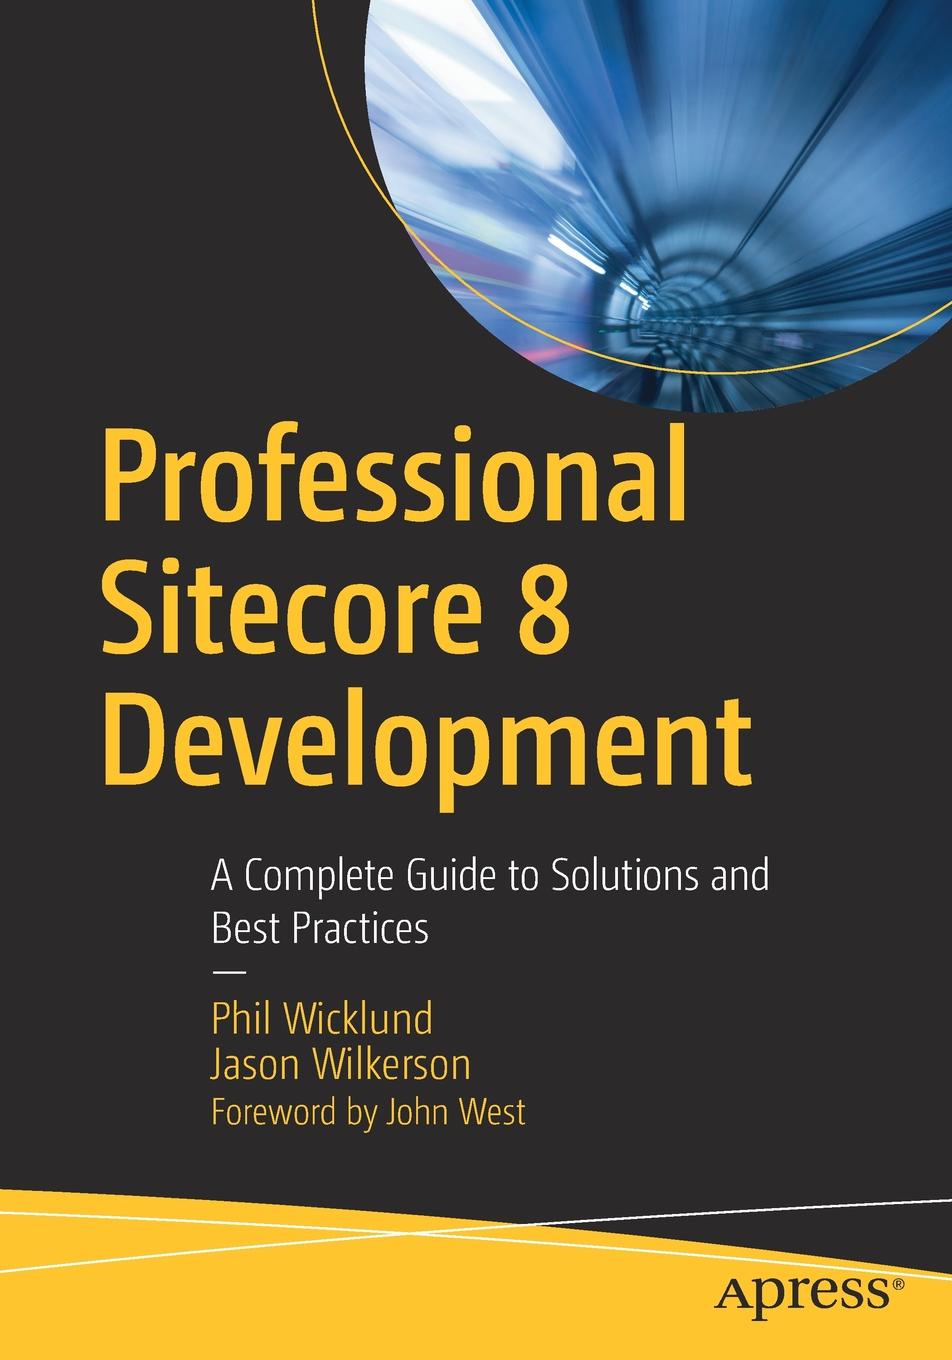 Professional Sitecore 8 Development. A Complete Guide to Solutions and Best Practices